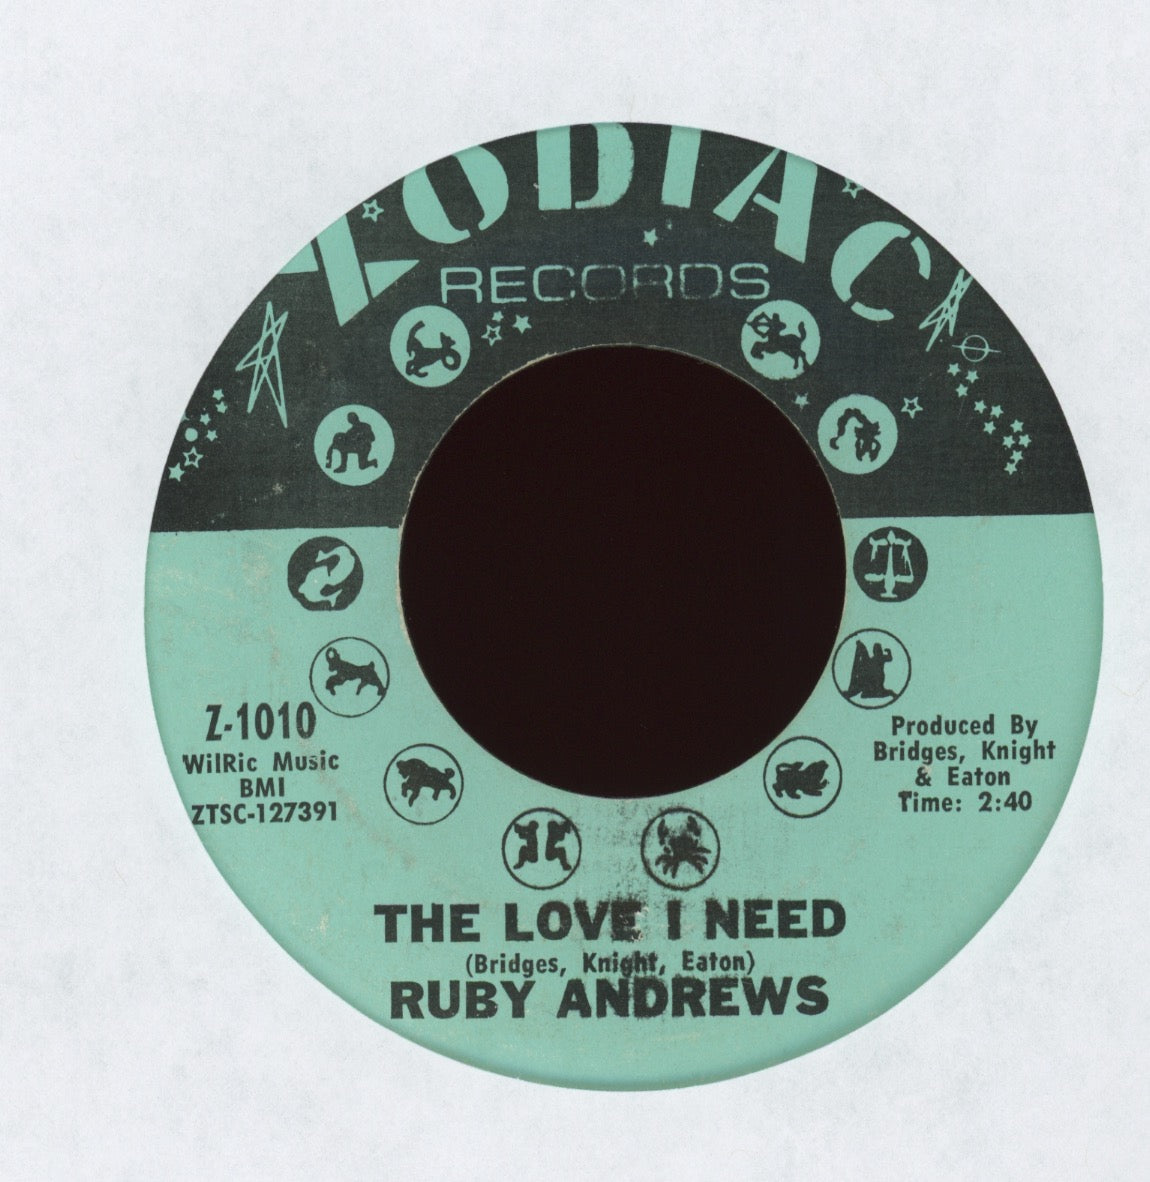 Ruby Andrews - Just Loving You on Zodiac Northern Soul 45